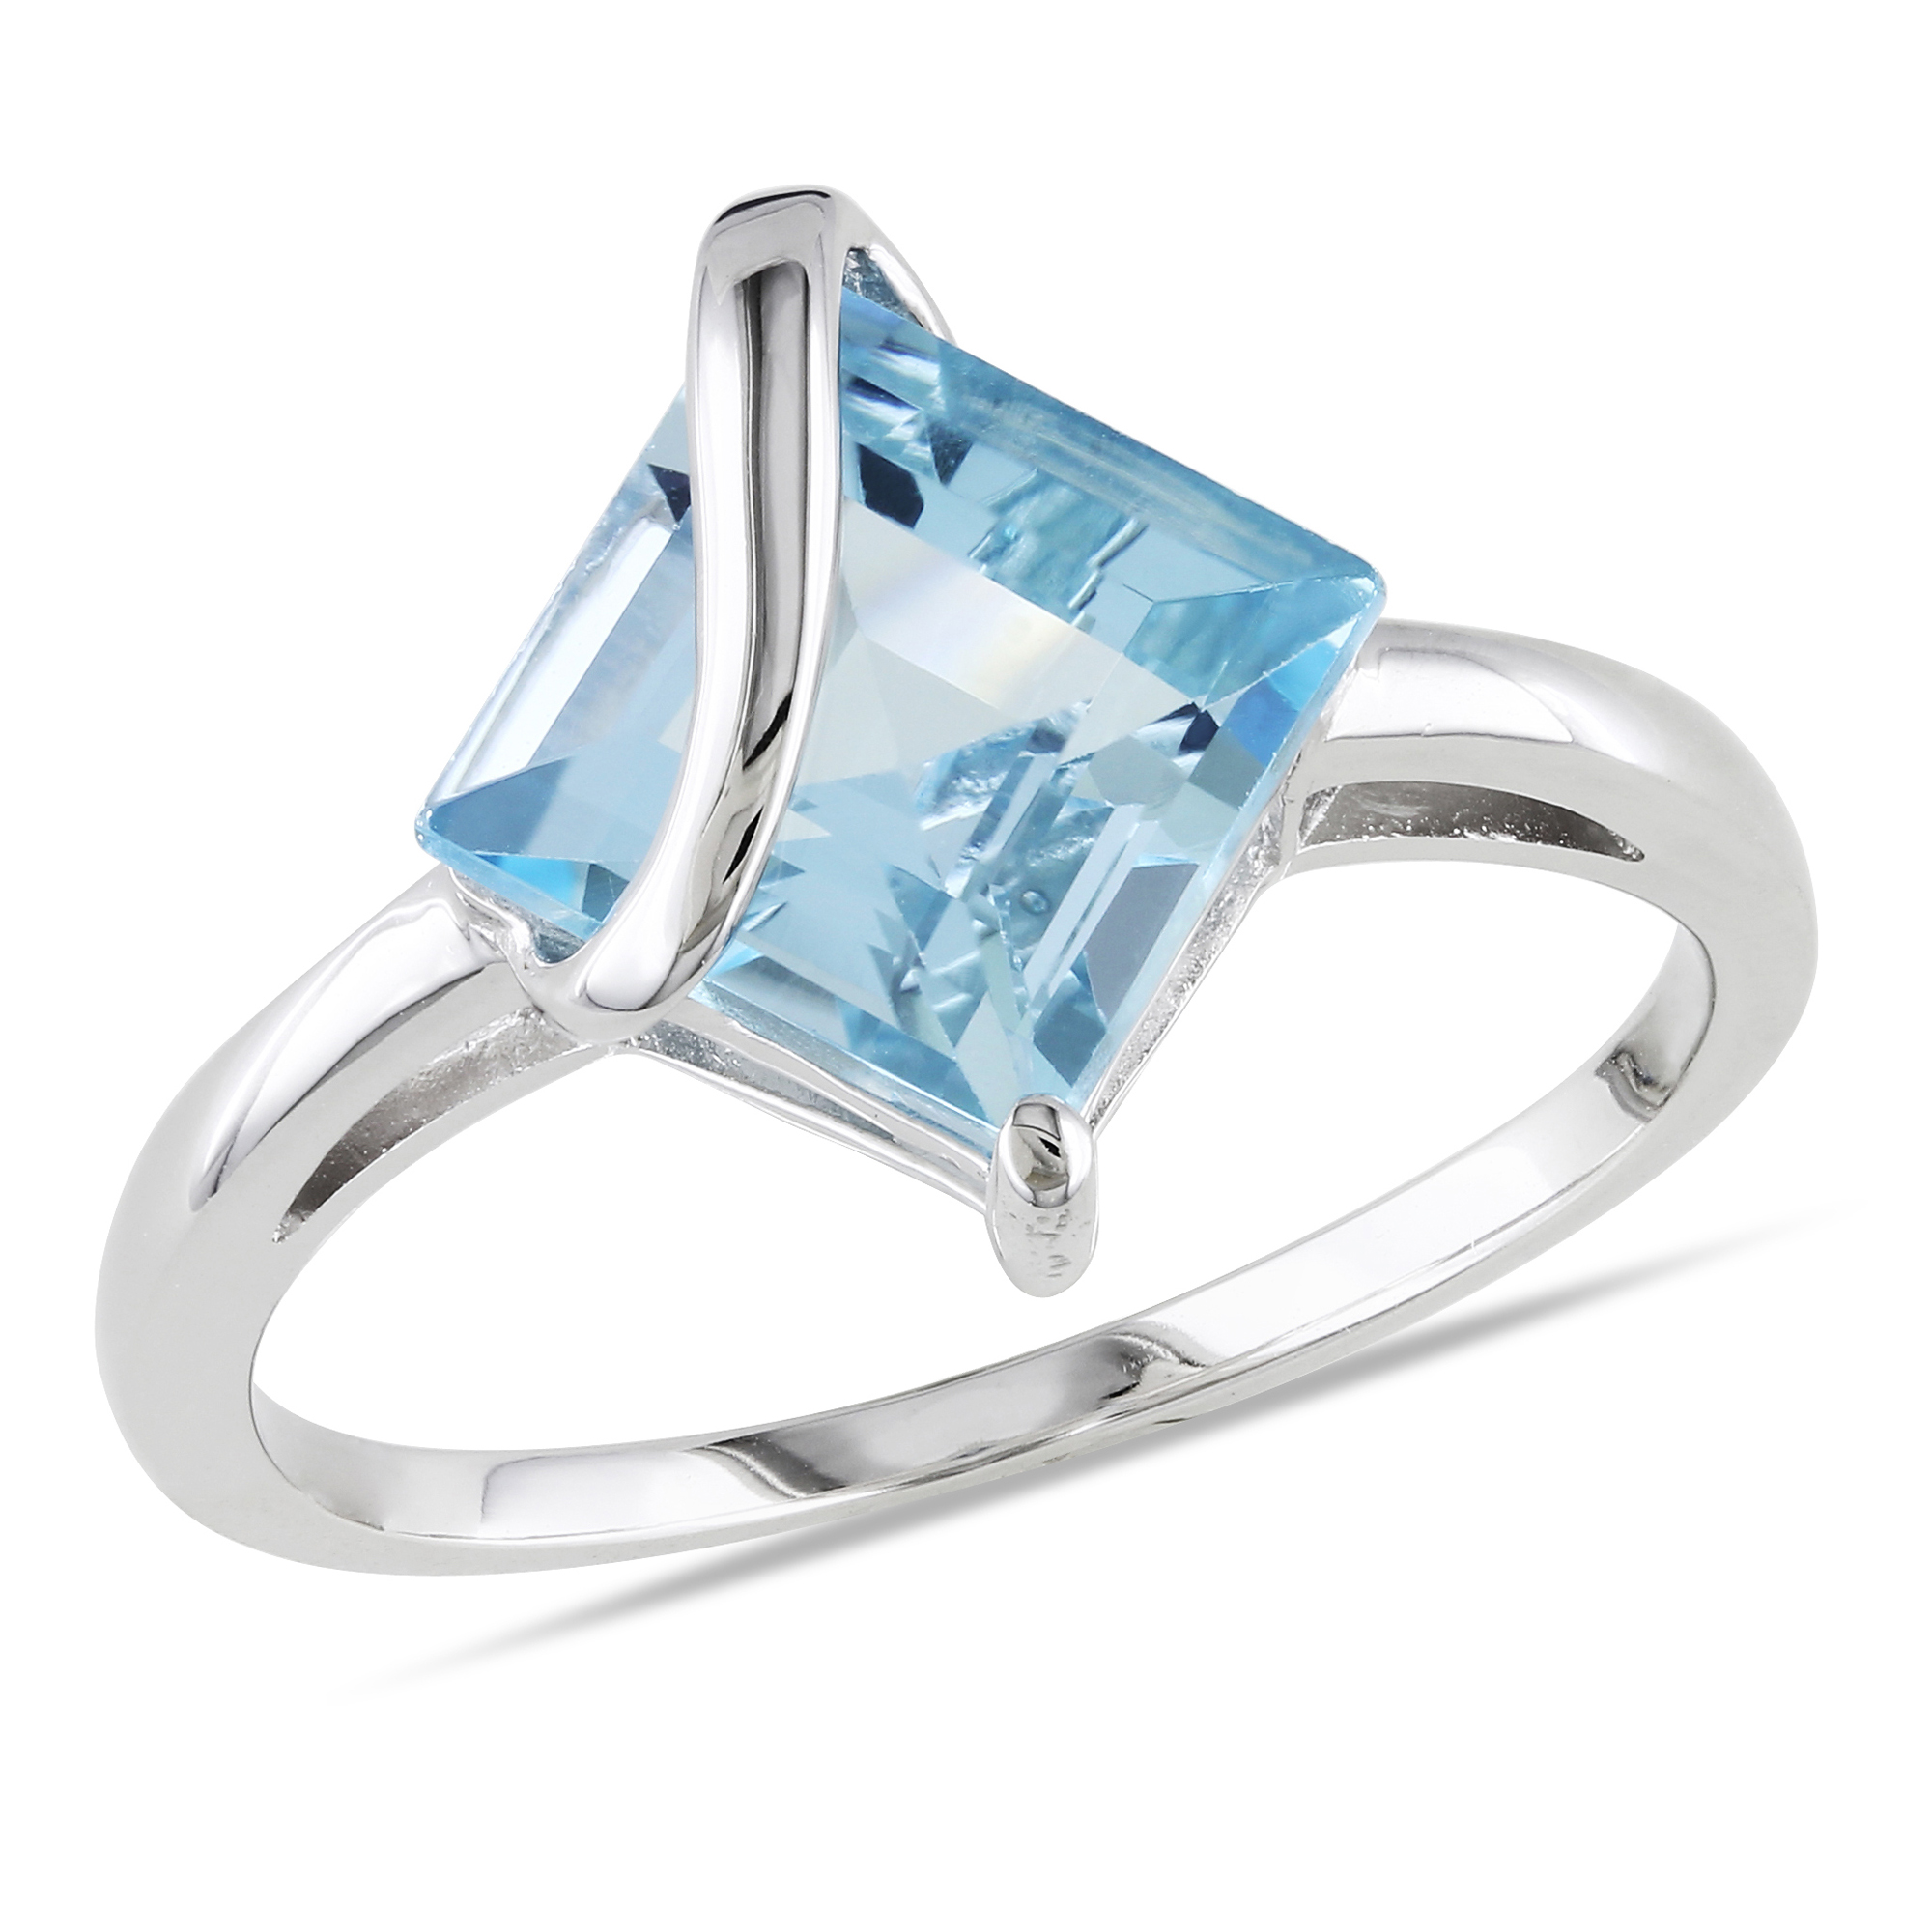 Amour 3 Carat T.G.W. Blue Topaz Fashion Ring in Sterling Silver